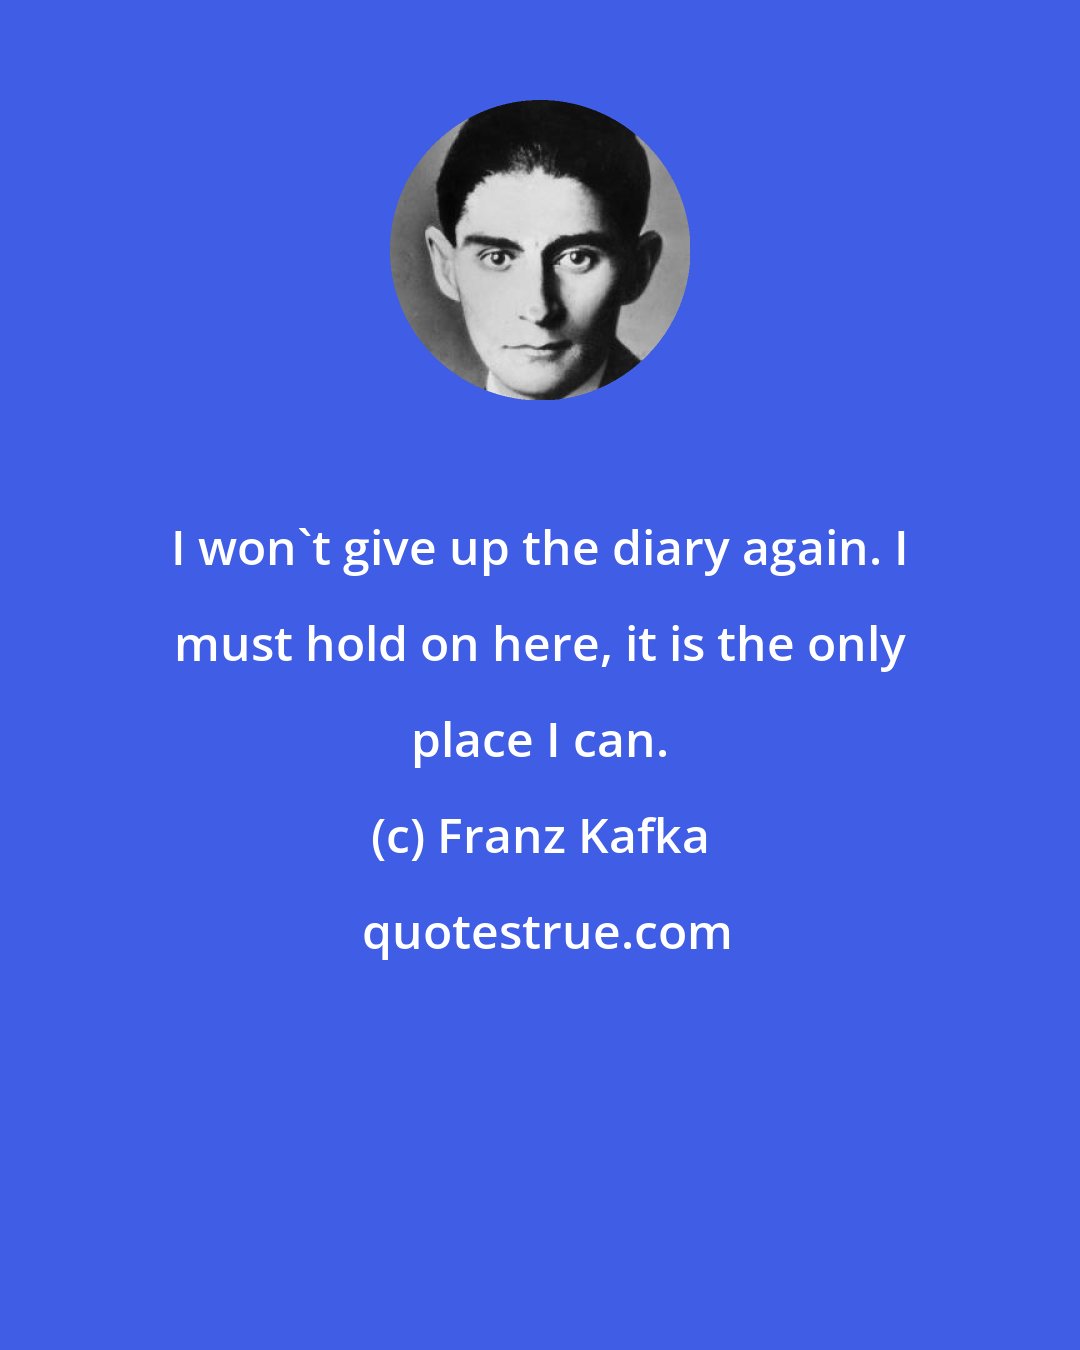 Franz Kafka: I won't give up the diary again. I must hold on here, it is the only place I can.